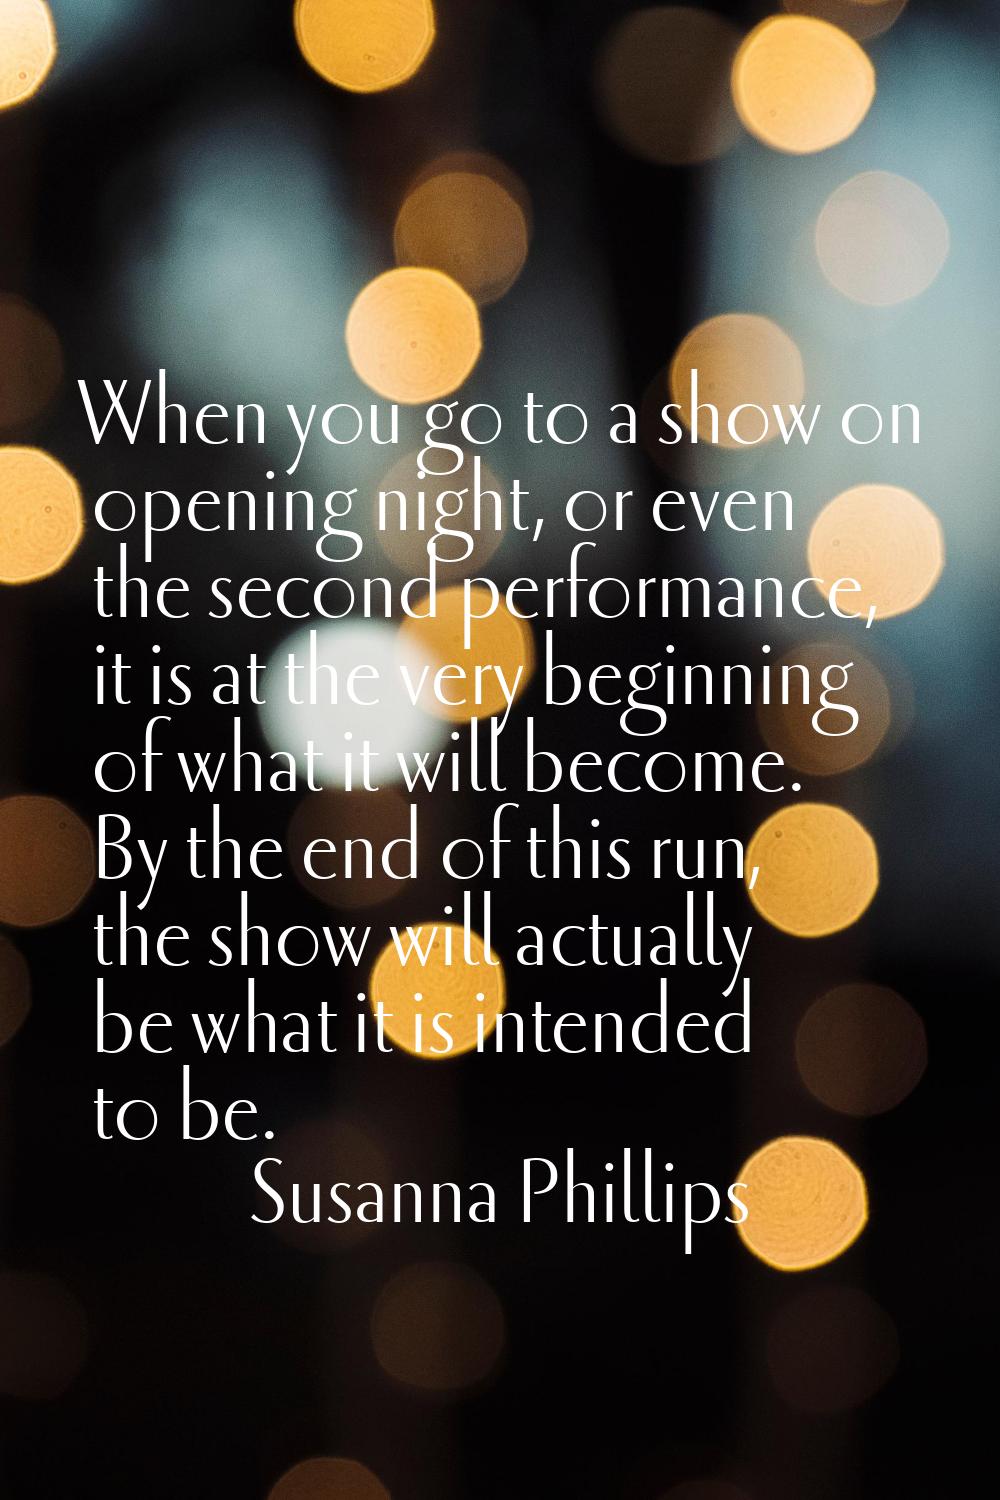 When you go to a show on opening night, or even the second performance, it is at the very beginning